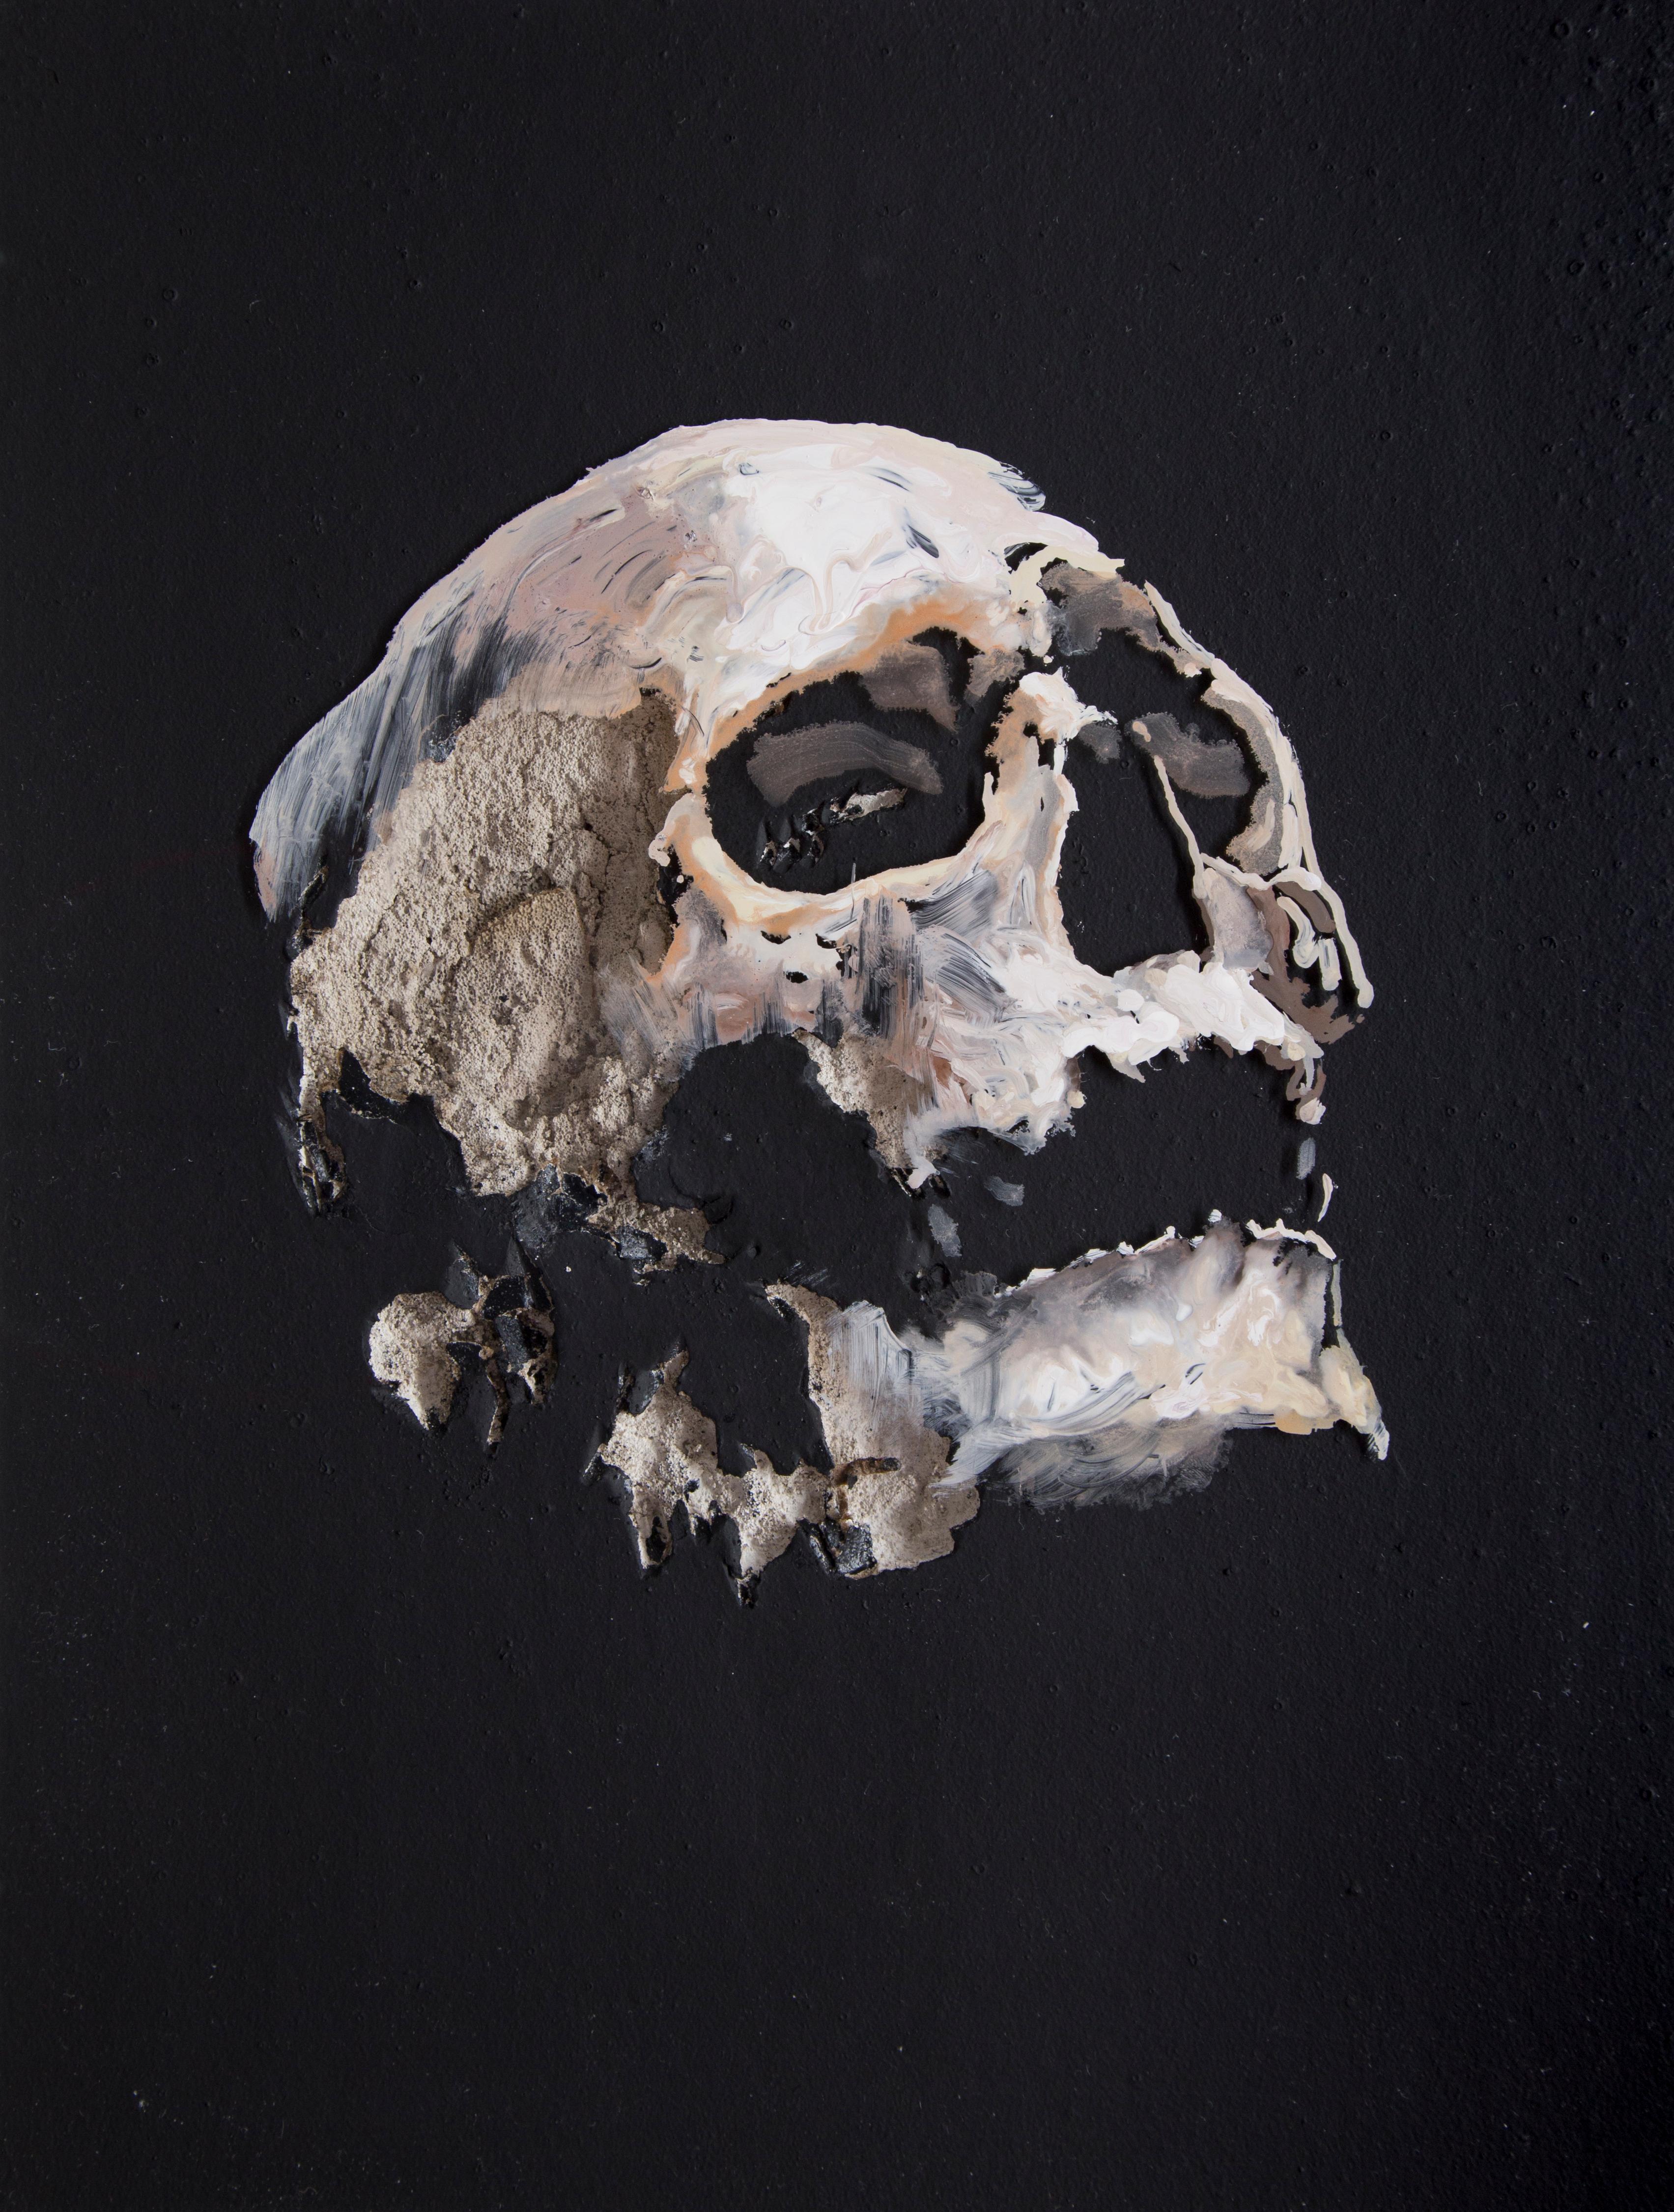 3D Painting of Skull: 'Wound in Black IV' - Mixed Media Art by Juan Miguel Palacios